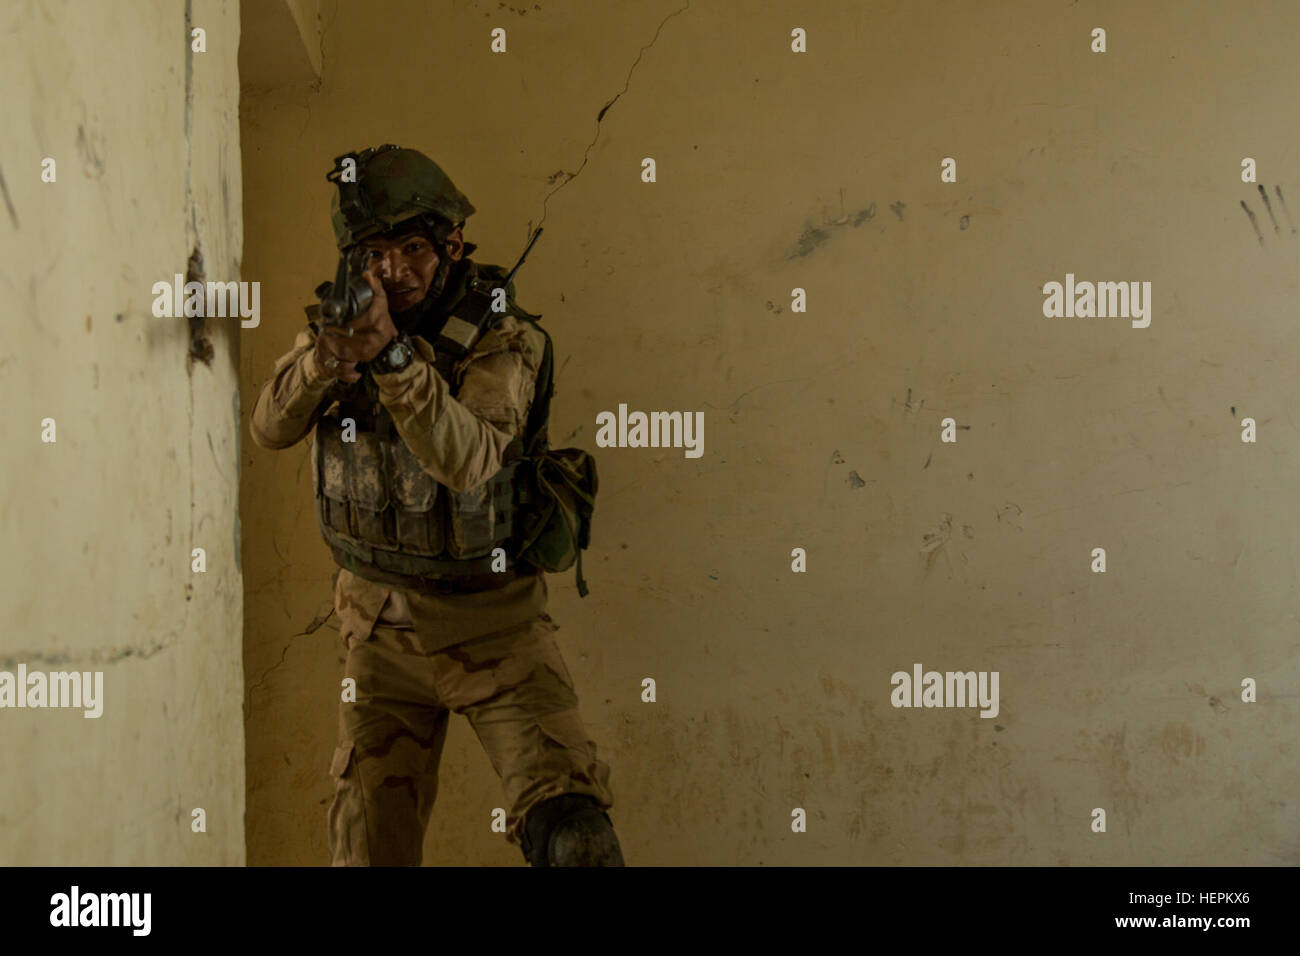 An Iraqi soldier assigned to 71st Iraqi Army Brigade clears a room during urban operations training at Camp Taji, Iraq, Nov. 4, 2015. The soldier participated in the training to learn how to properly clear buildings and populated areas during assaults against the Islamic State of Iraq and the Levant (ISIL). The training is part of the building partner capacity mission led by coalition members assigned to Task Group Taji, and part of Combined Joint Task Force – Operation Inherent Resolve’s mission to defeat ISIL and the threat they pose to Iraq, Syria, the region, and the wider international co Stock Photo